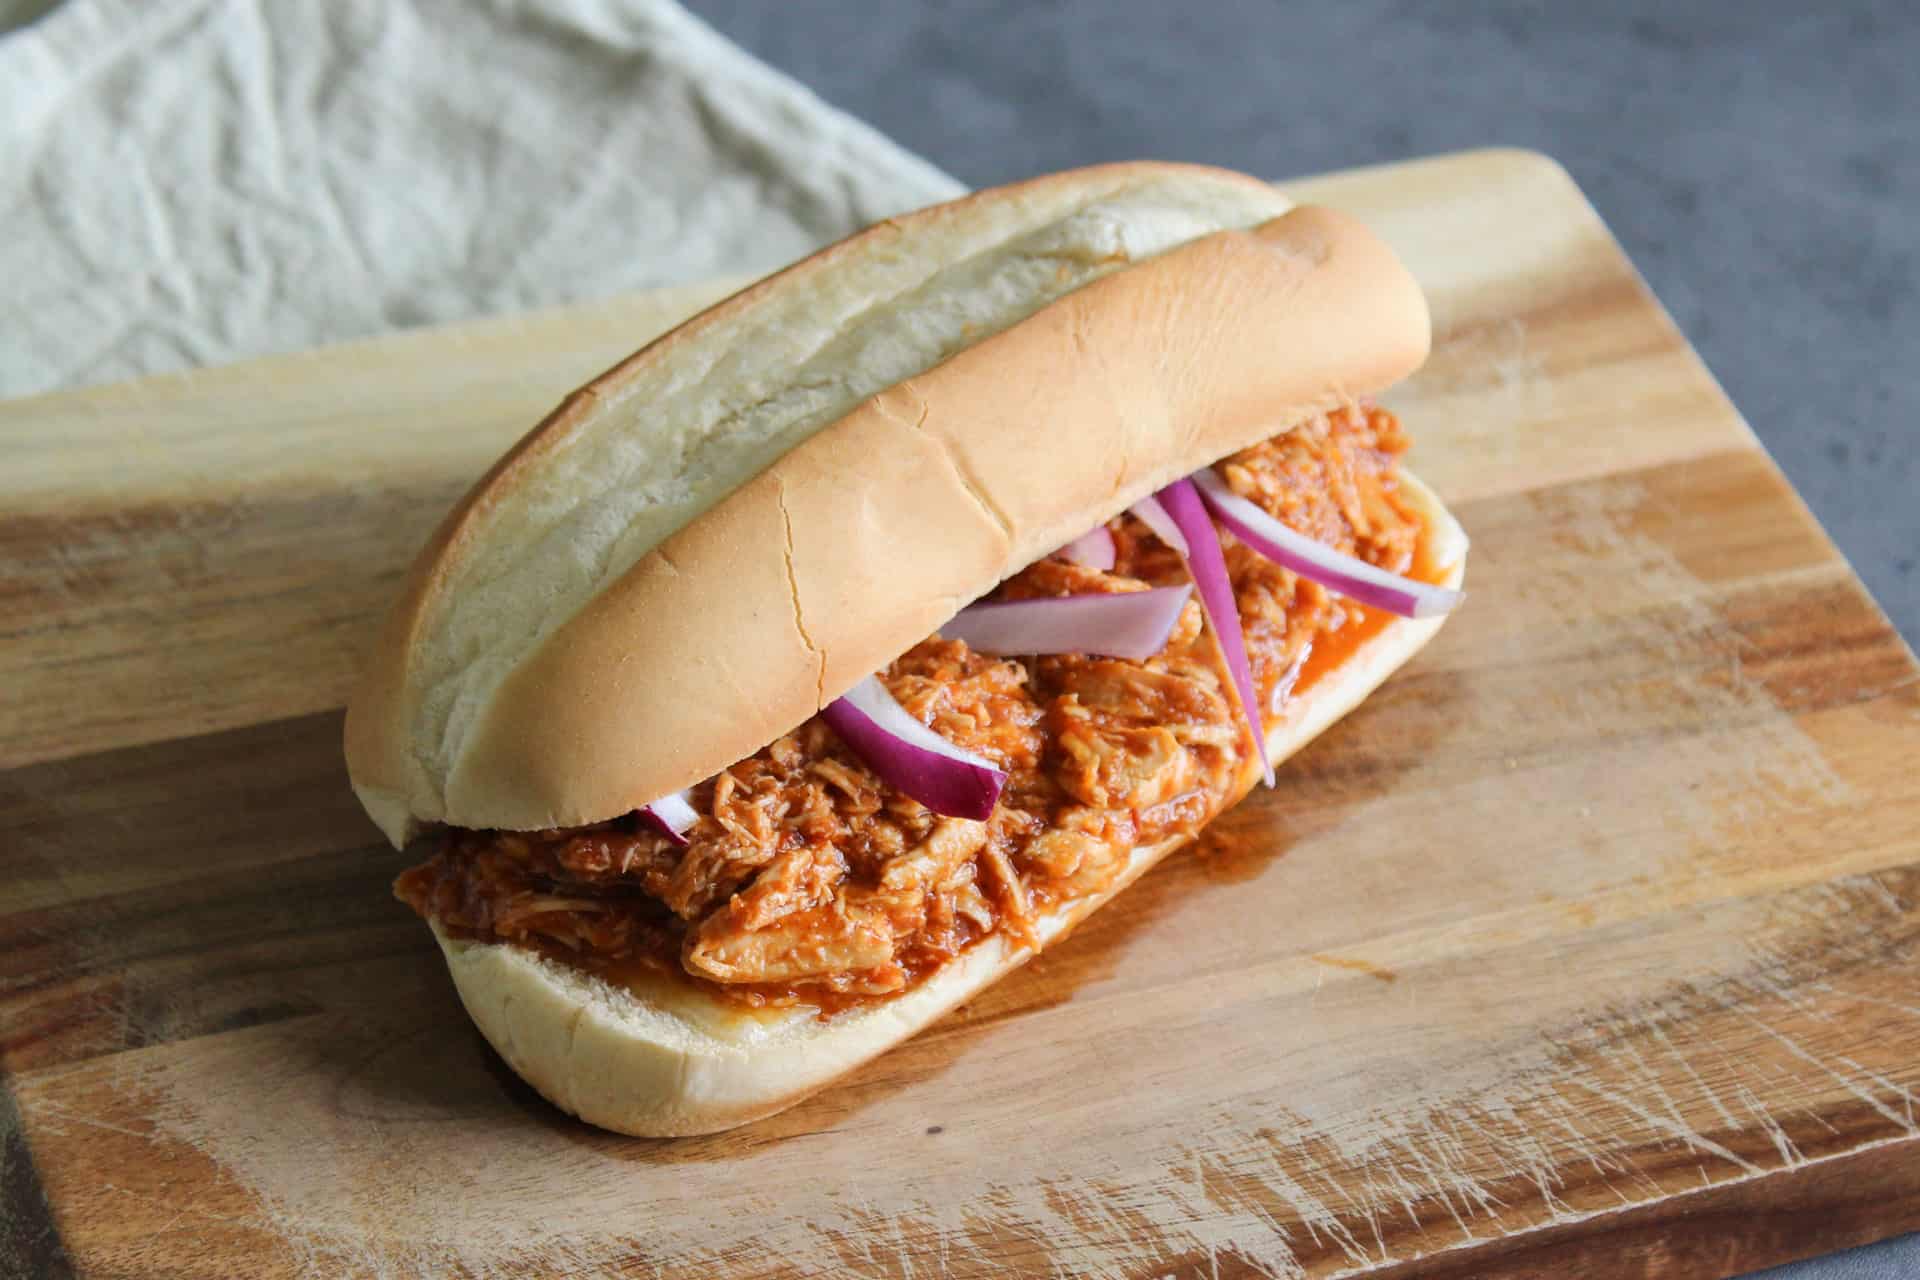 Shredded chipotle chicken on a sandwich roll with cheese and red onion